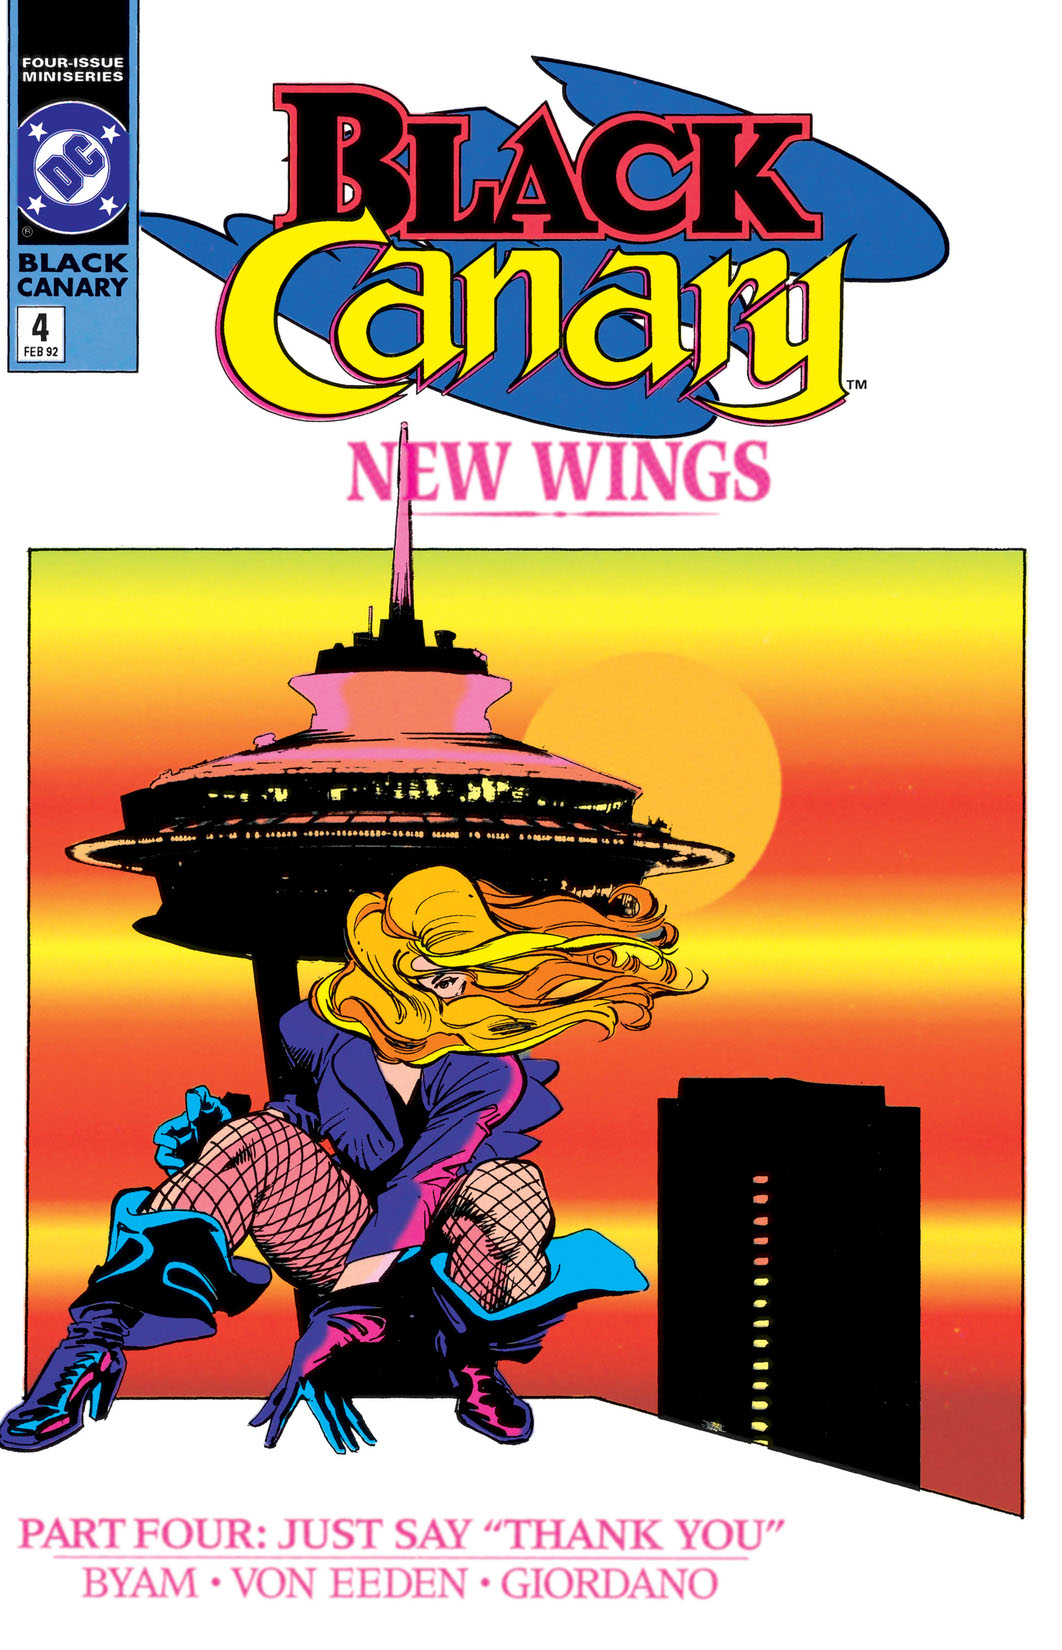 Black Canary (1991-) #4 preview images